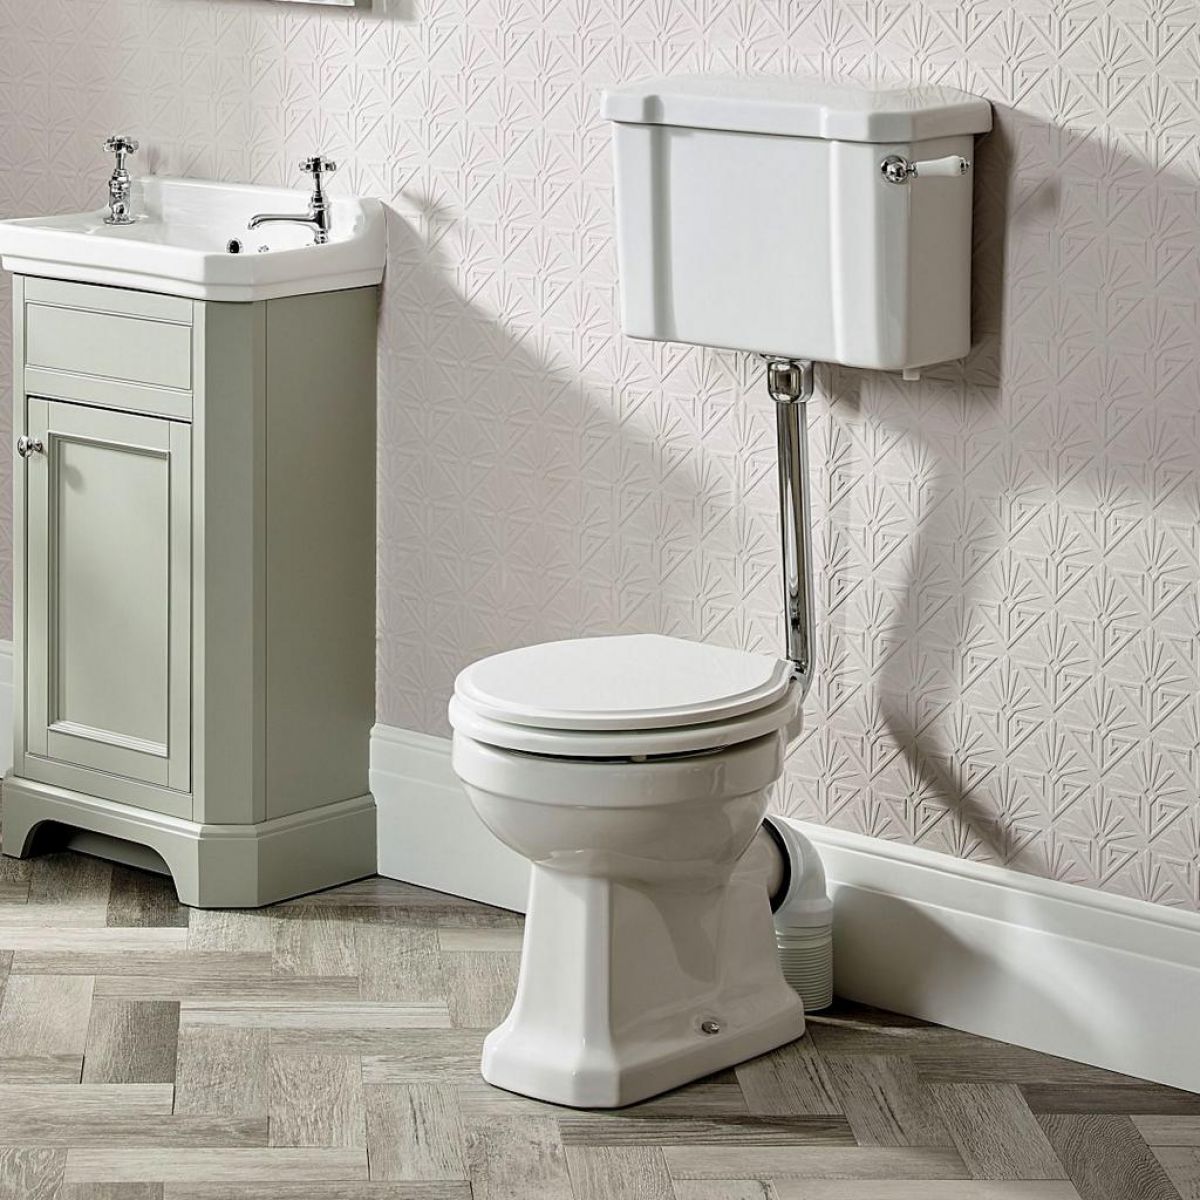 example image of a traditional toilet